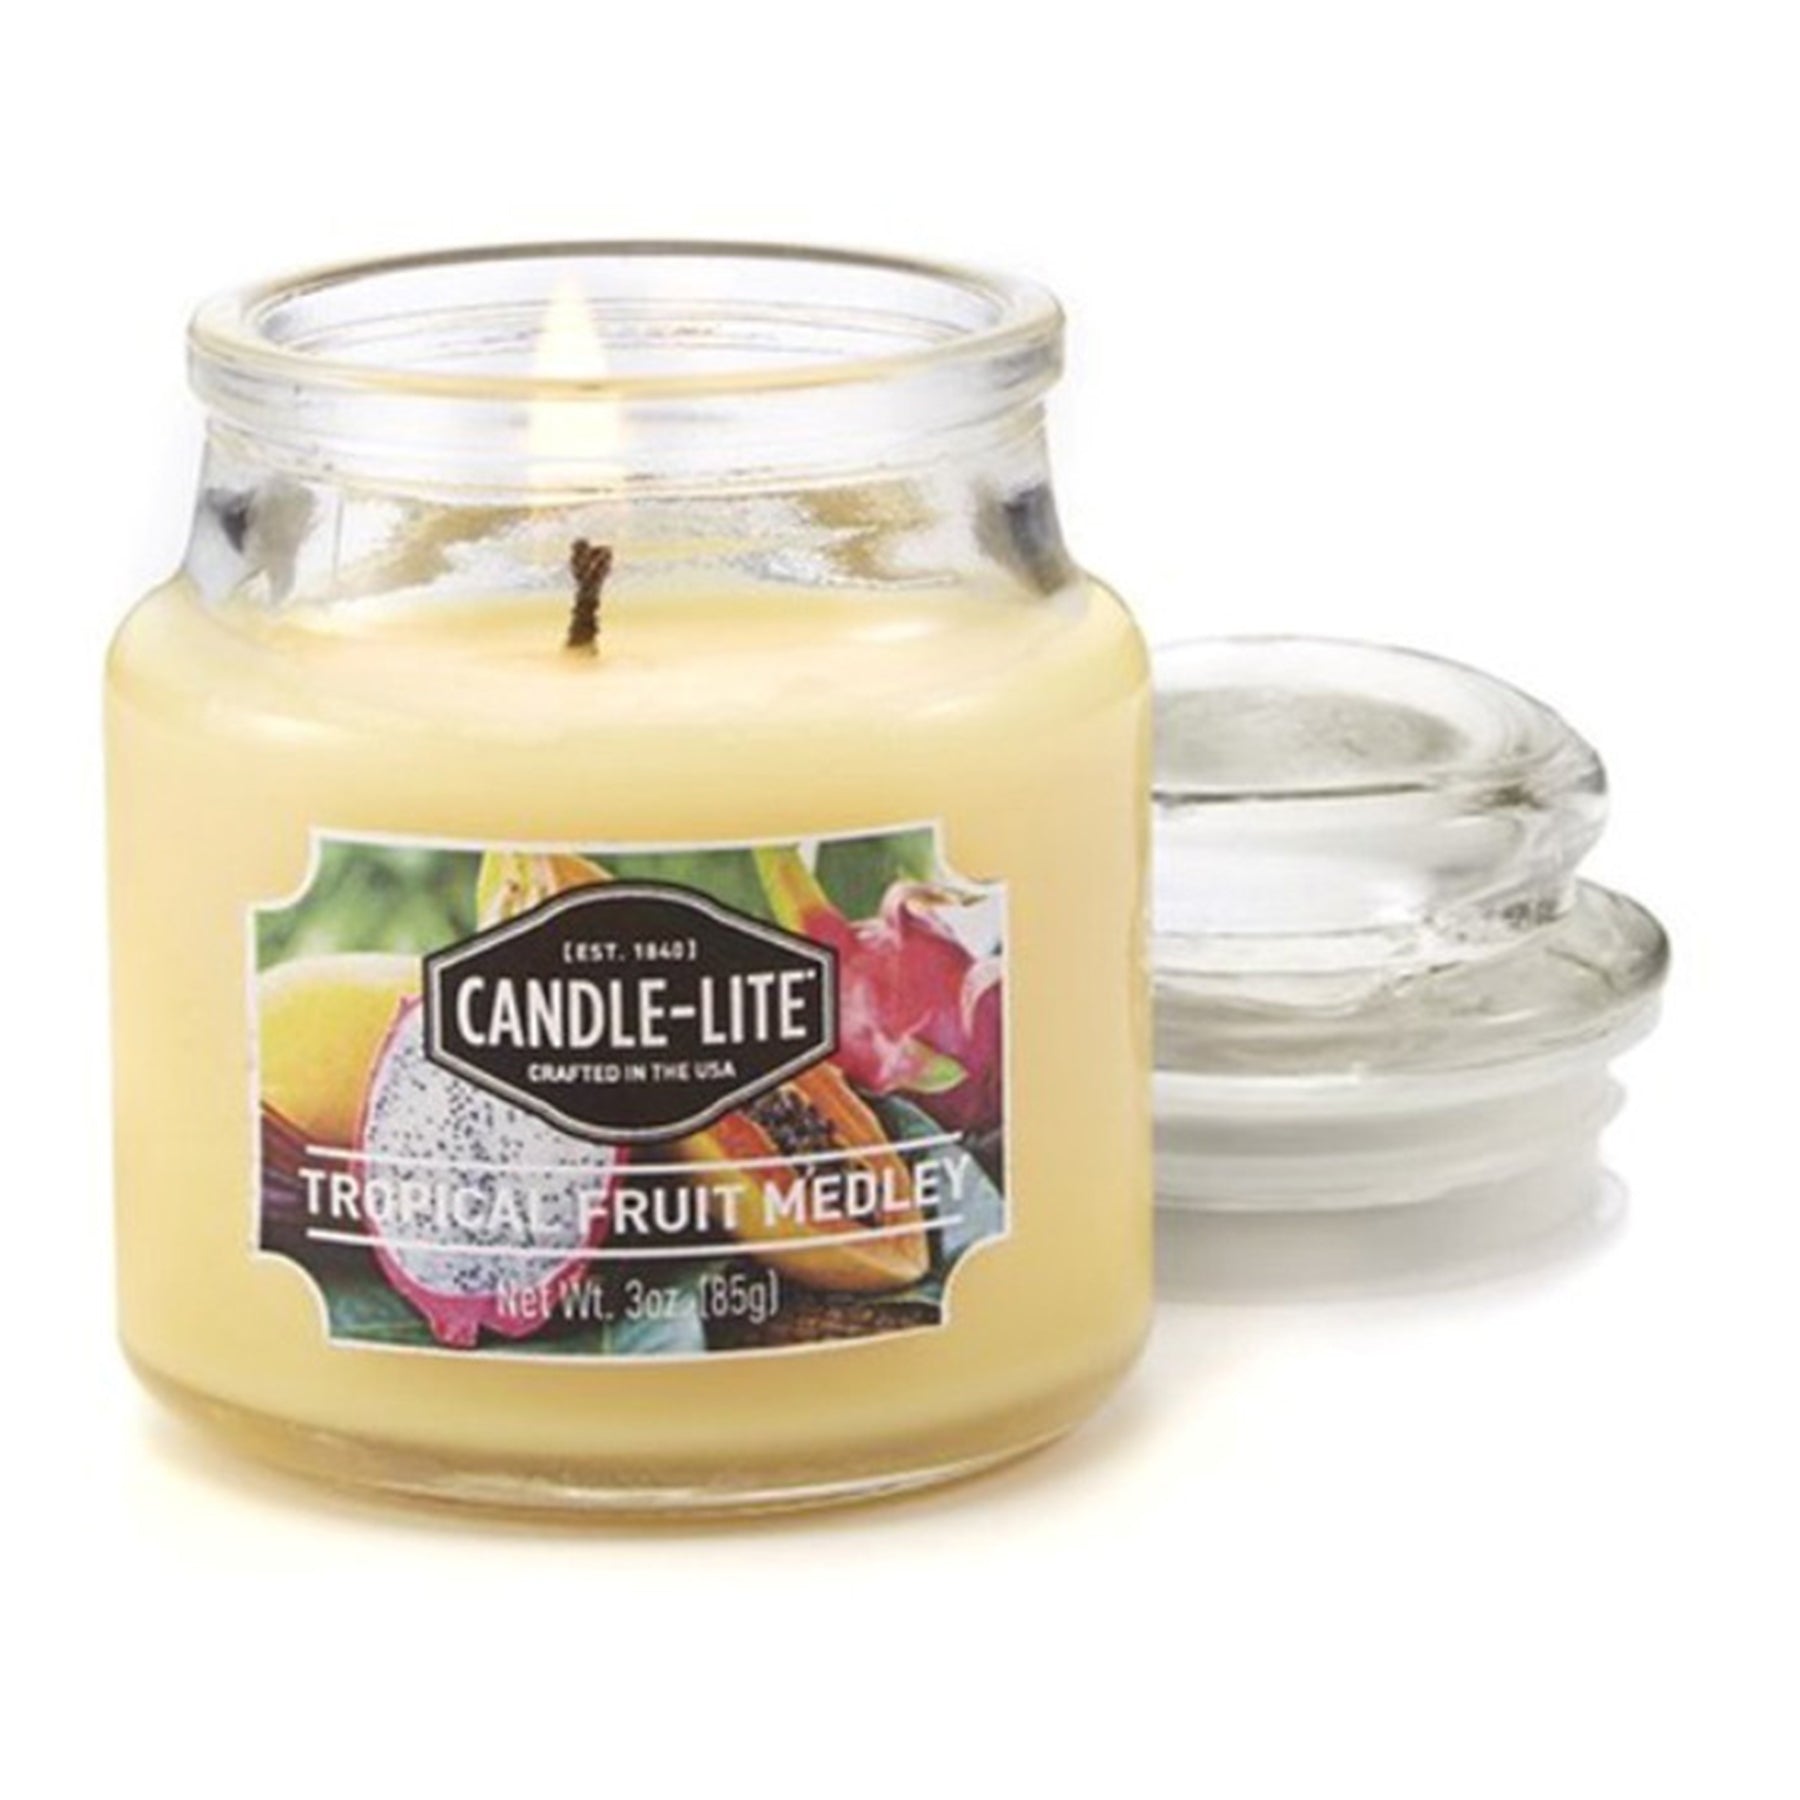 Candle with Fragrance - Tropical Fruit Medley